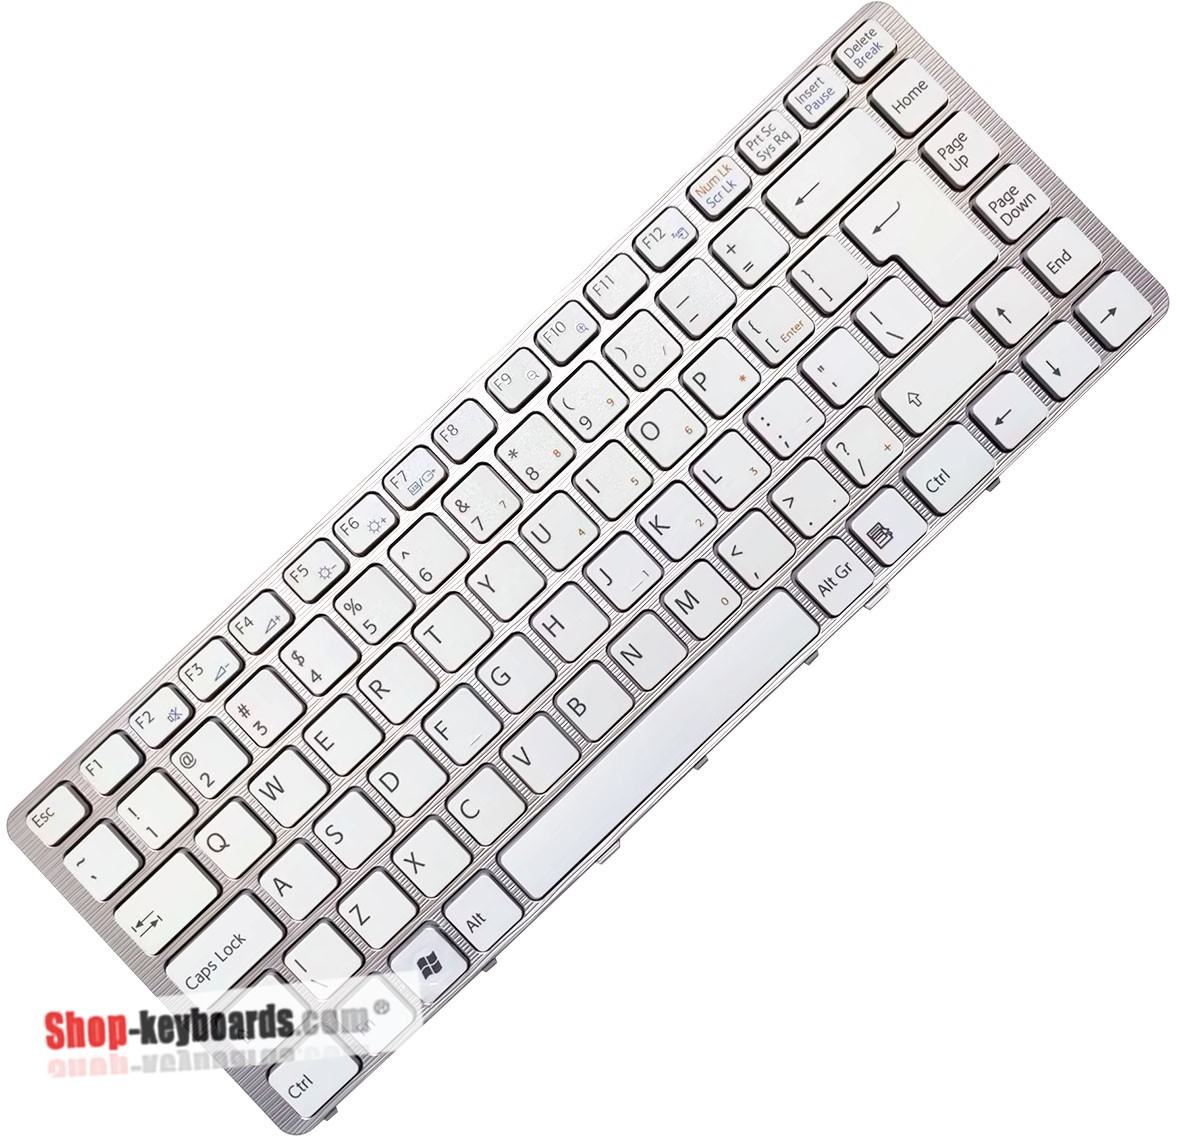 Sony Vaio VGN-NW330F/T Keyboard replacement